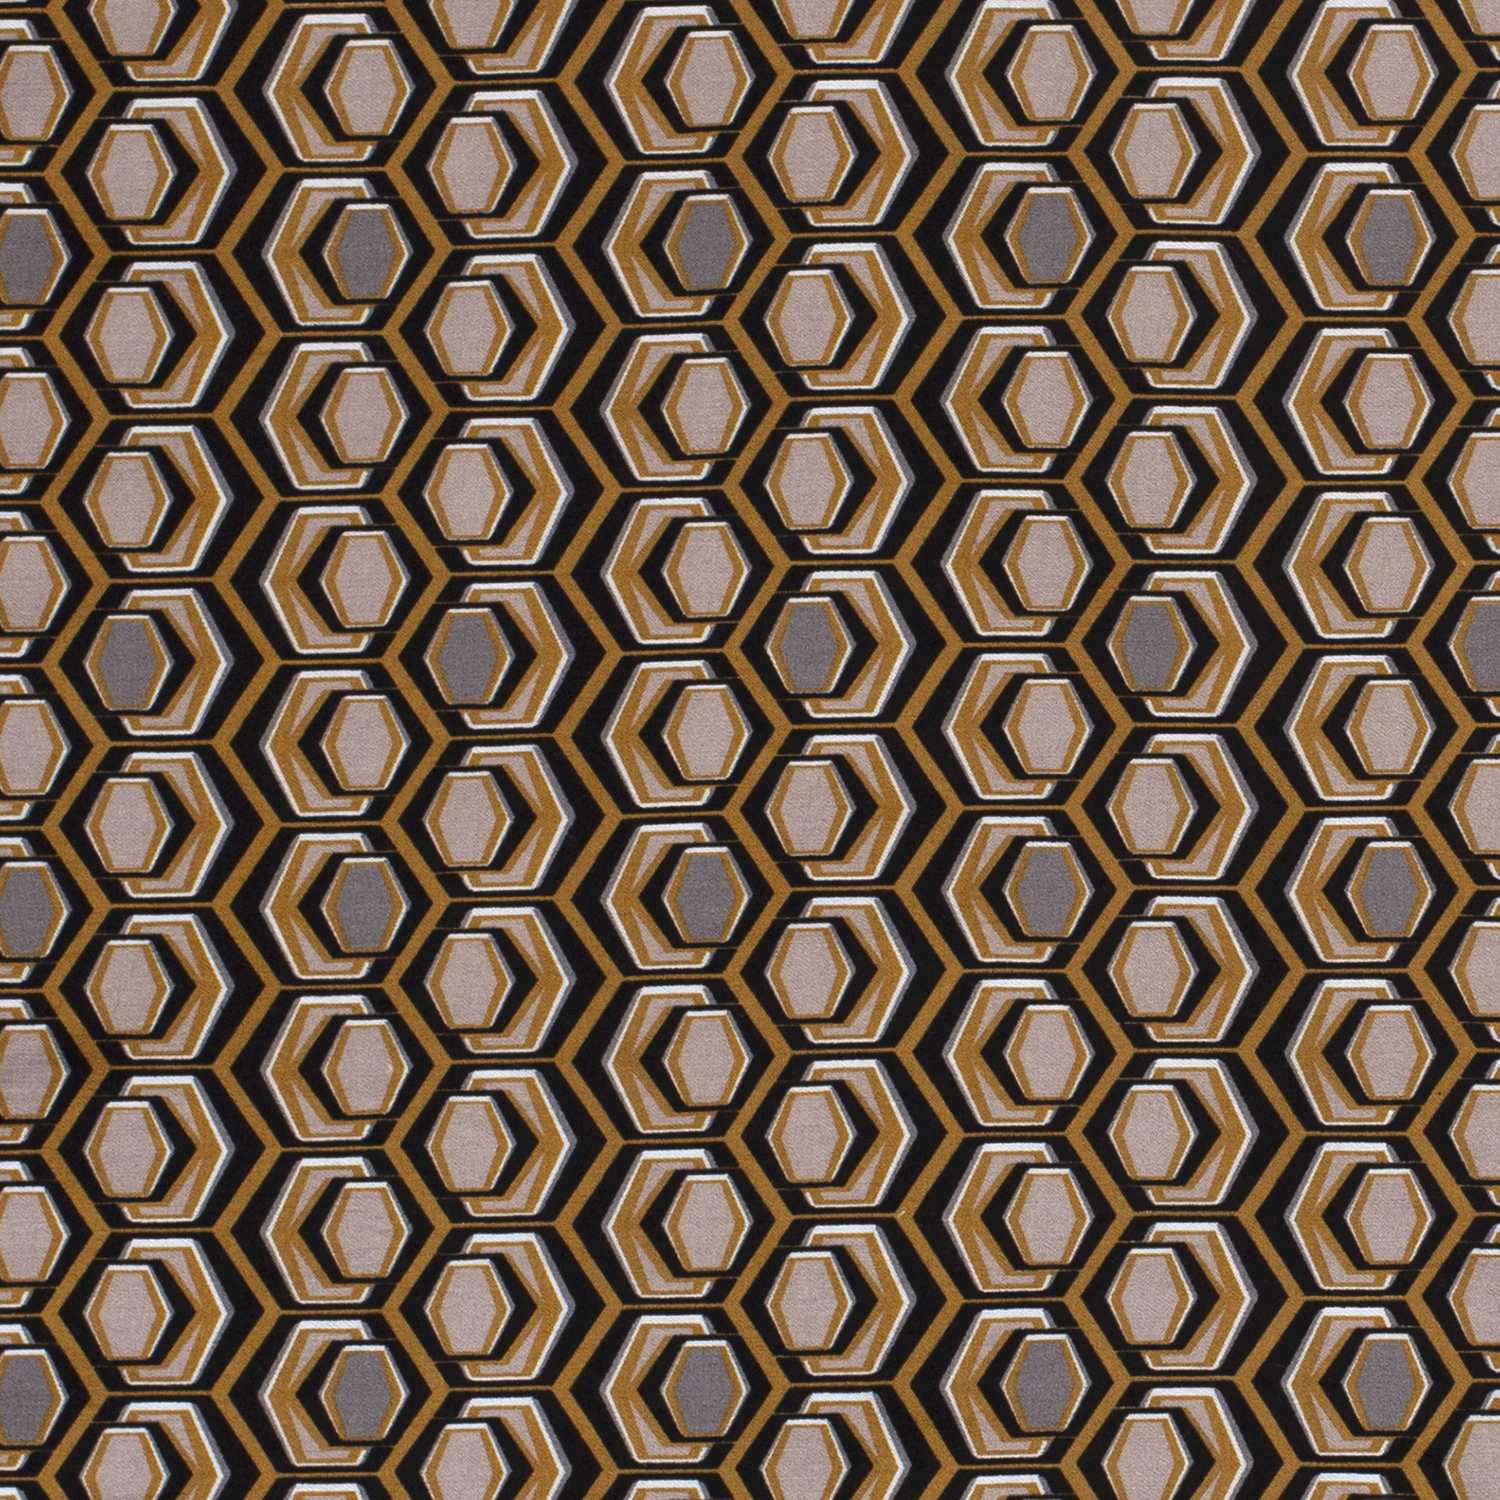 BENGALINE FABRIC PRINTED ABSTRACT BROWN